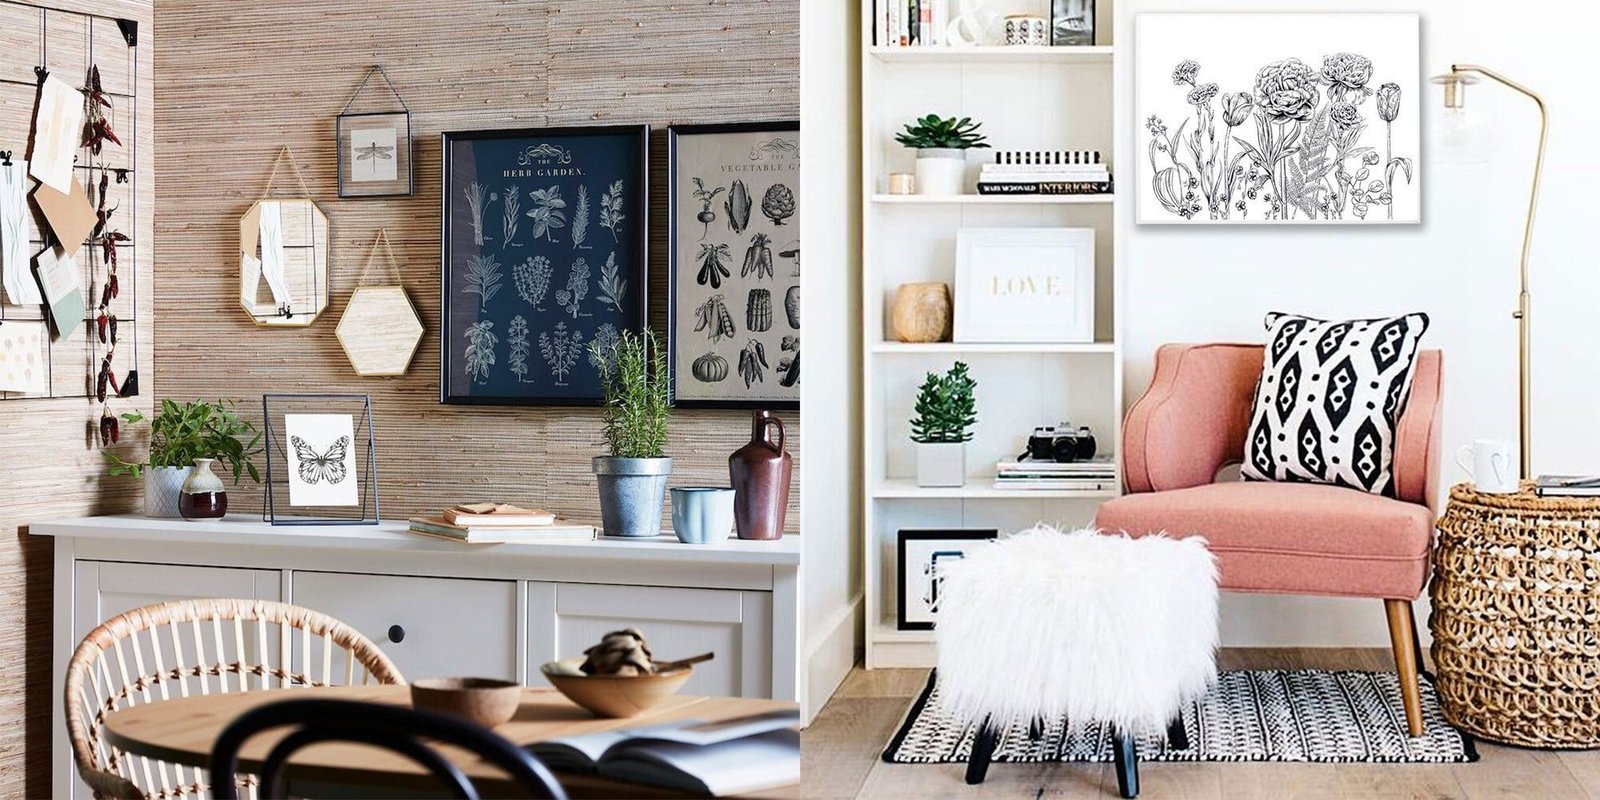 Shein Home Decor: Affordable and Trendy